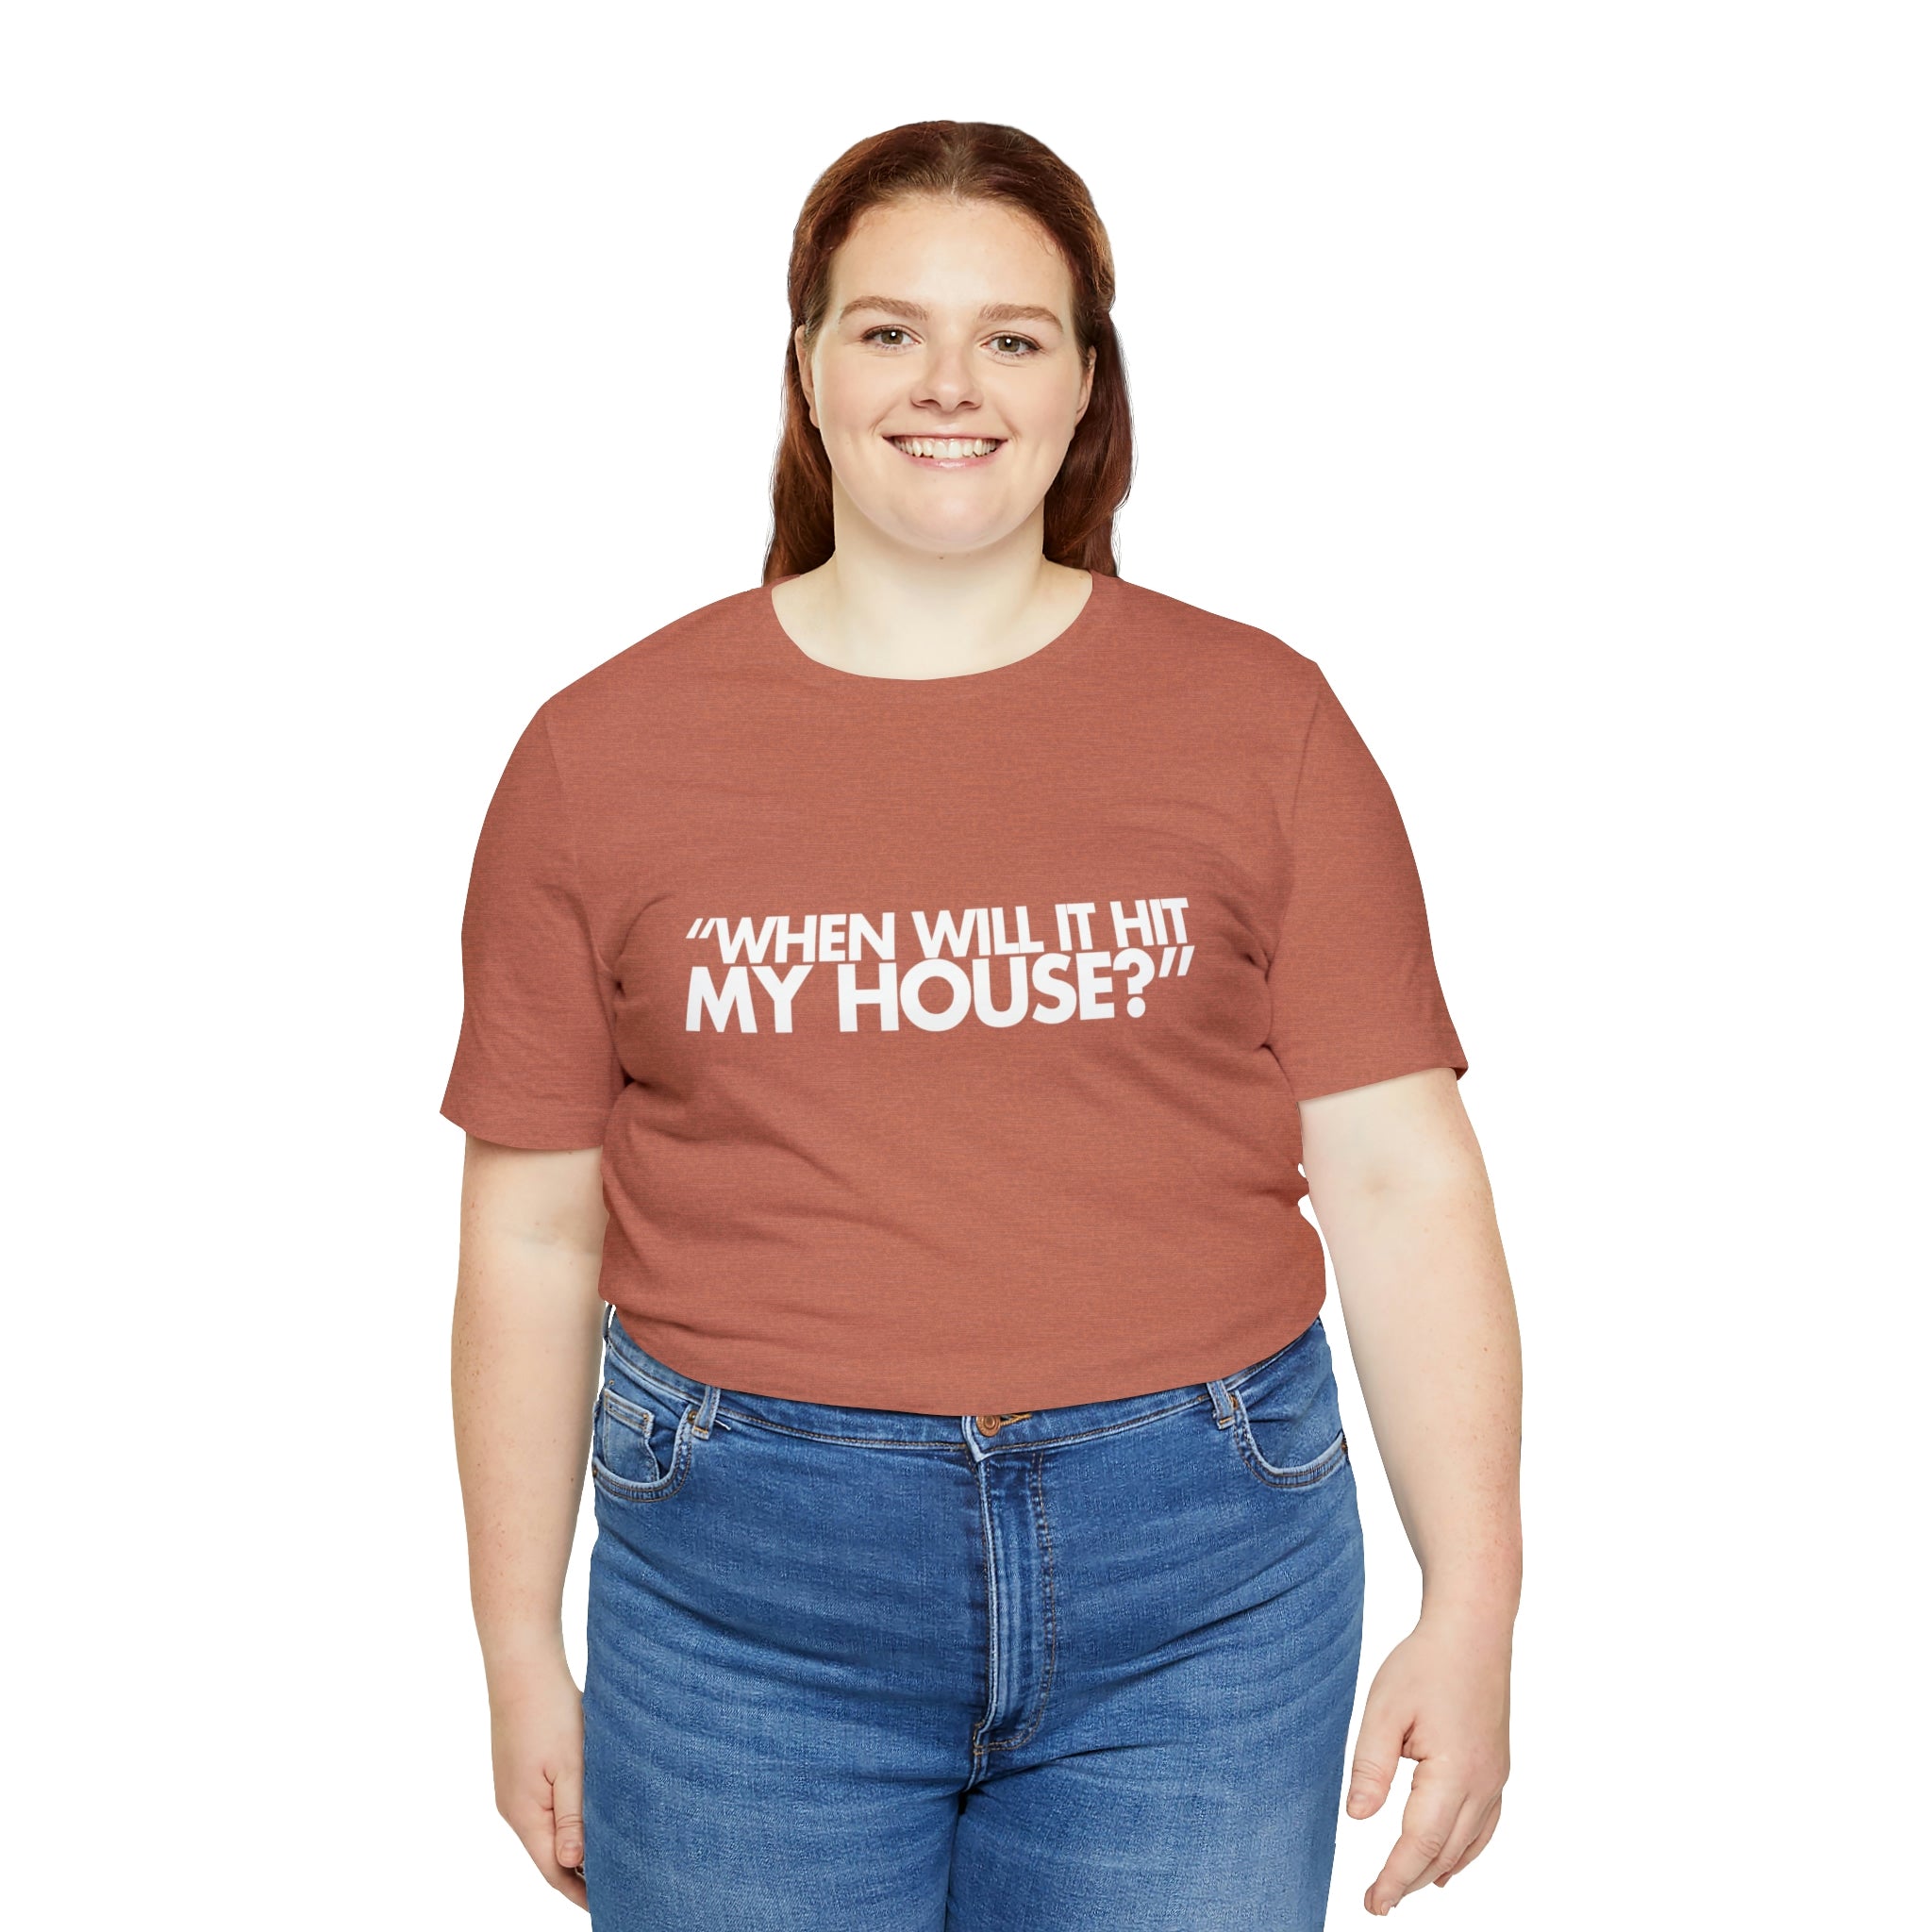 When will it hit my house? Tee 